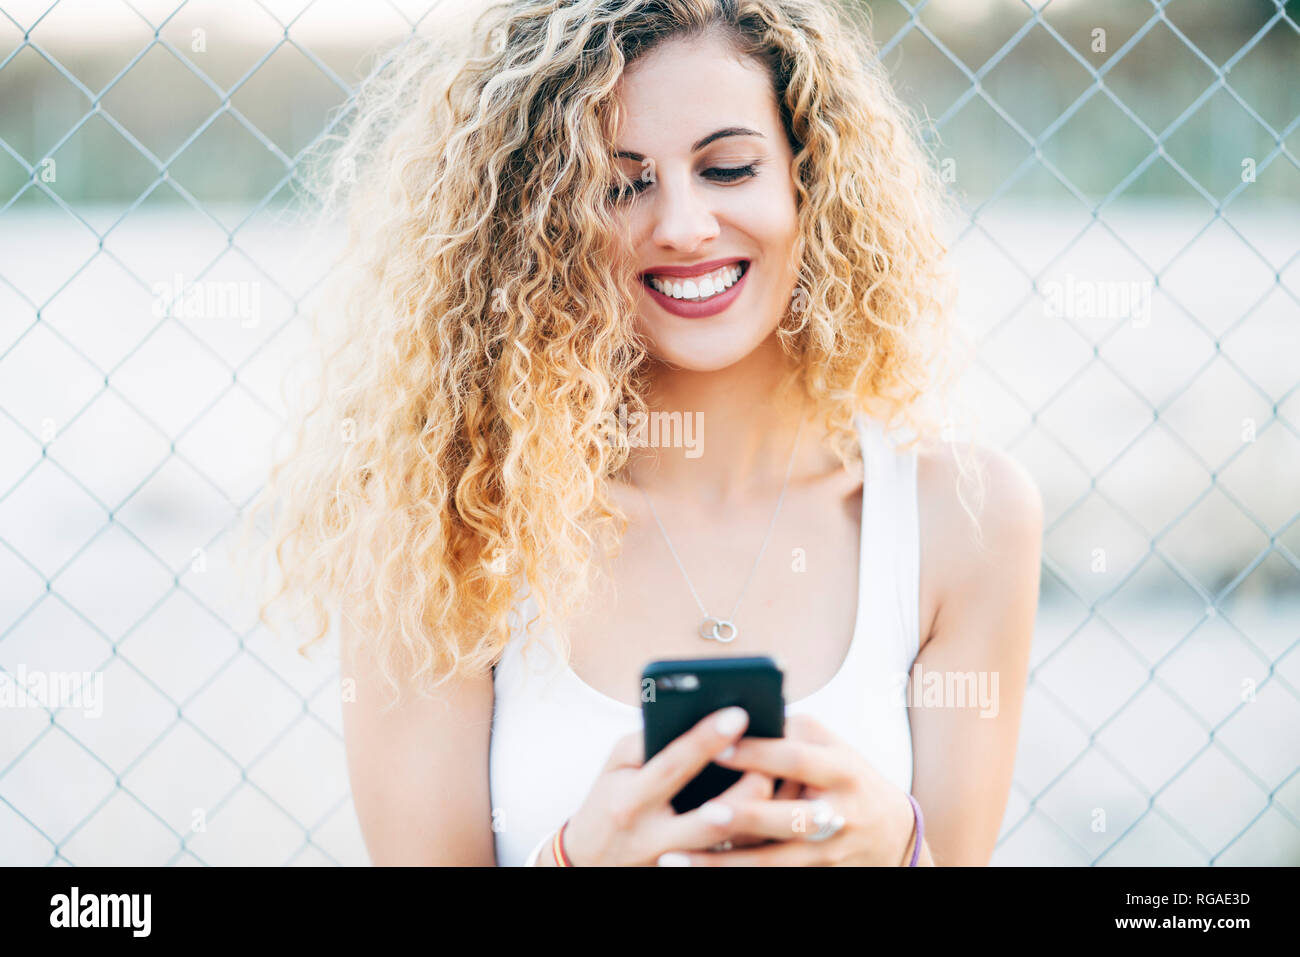 Portrait of laughing blond young woman looking at mobile phone Stock Photo